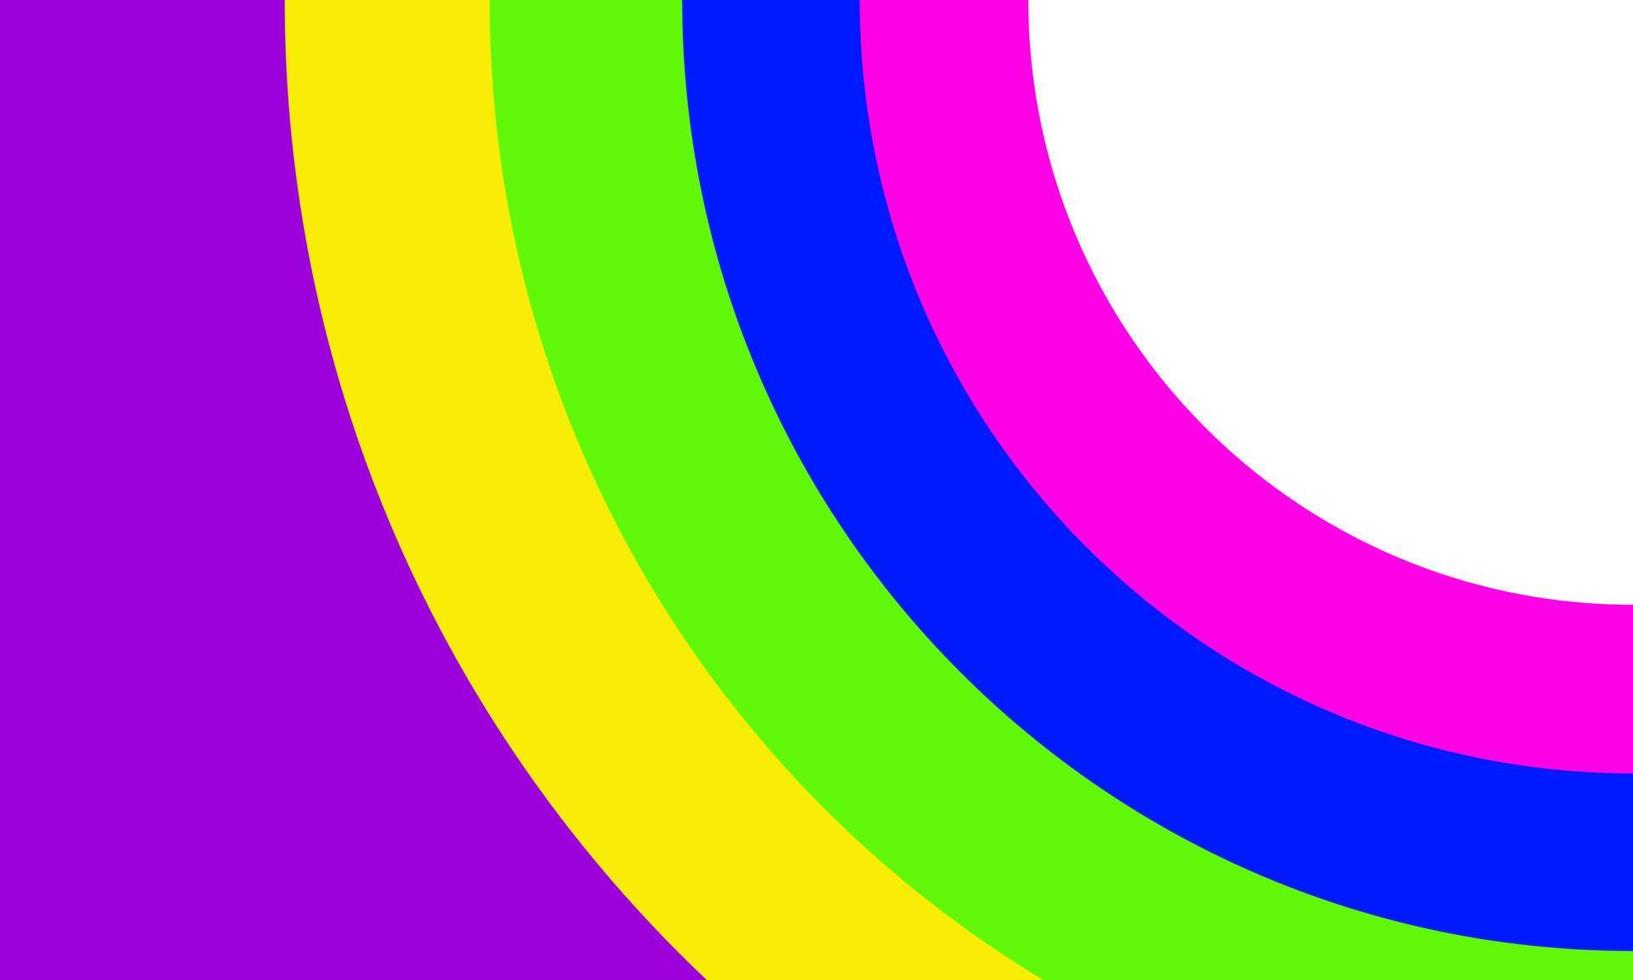 Colorful backgrounds like rainbow. EPS 10 vector